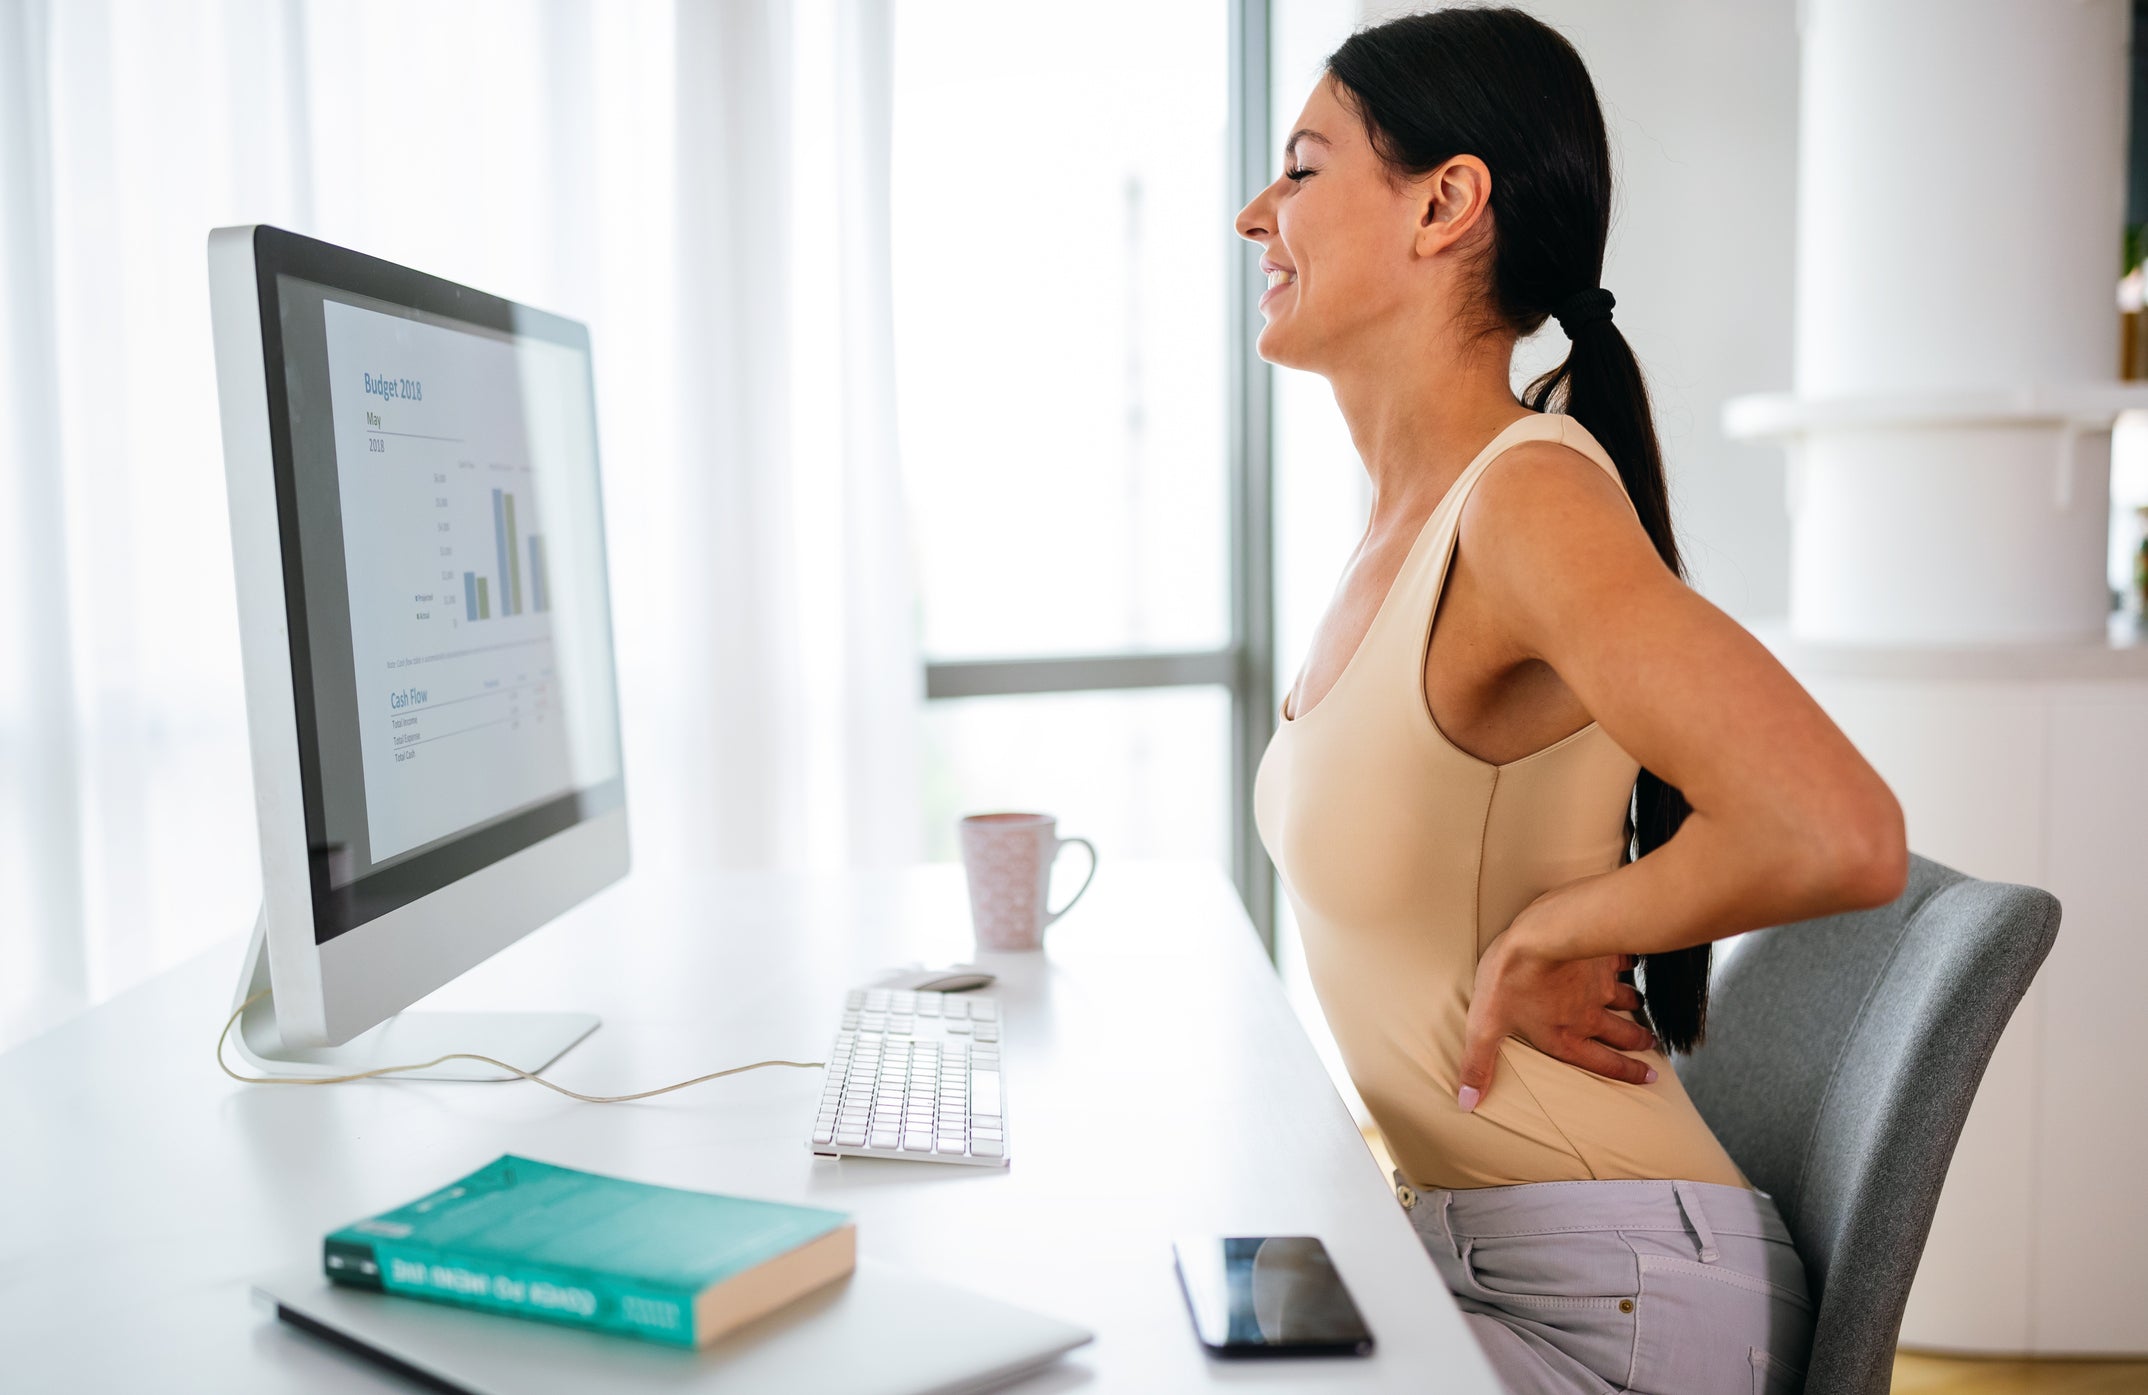 Girl suffering from back pain at work